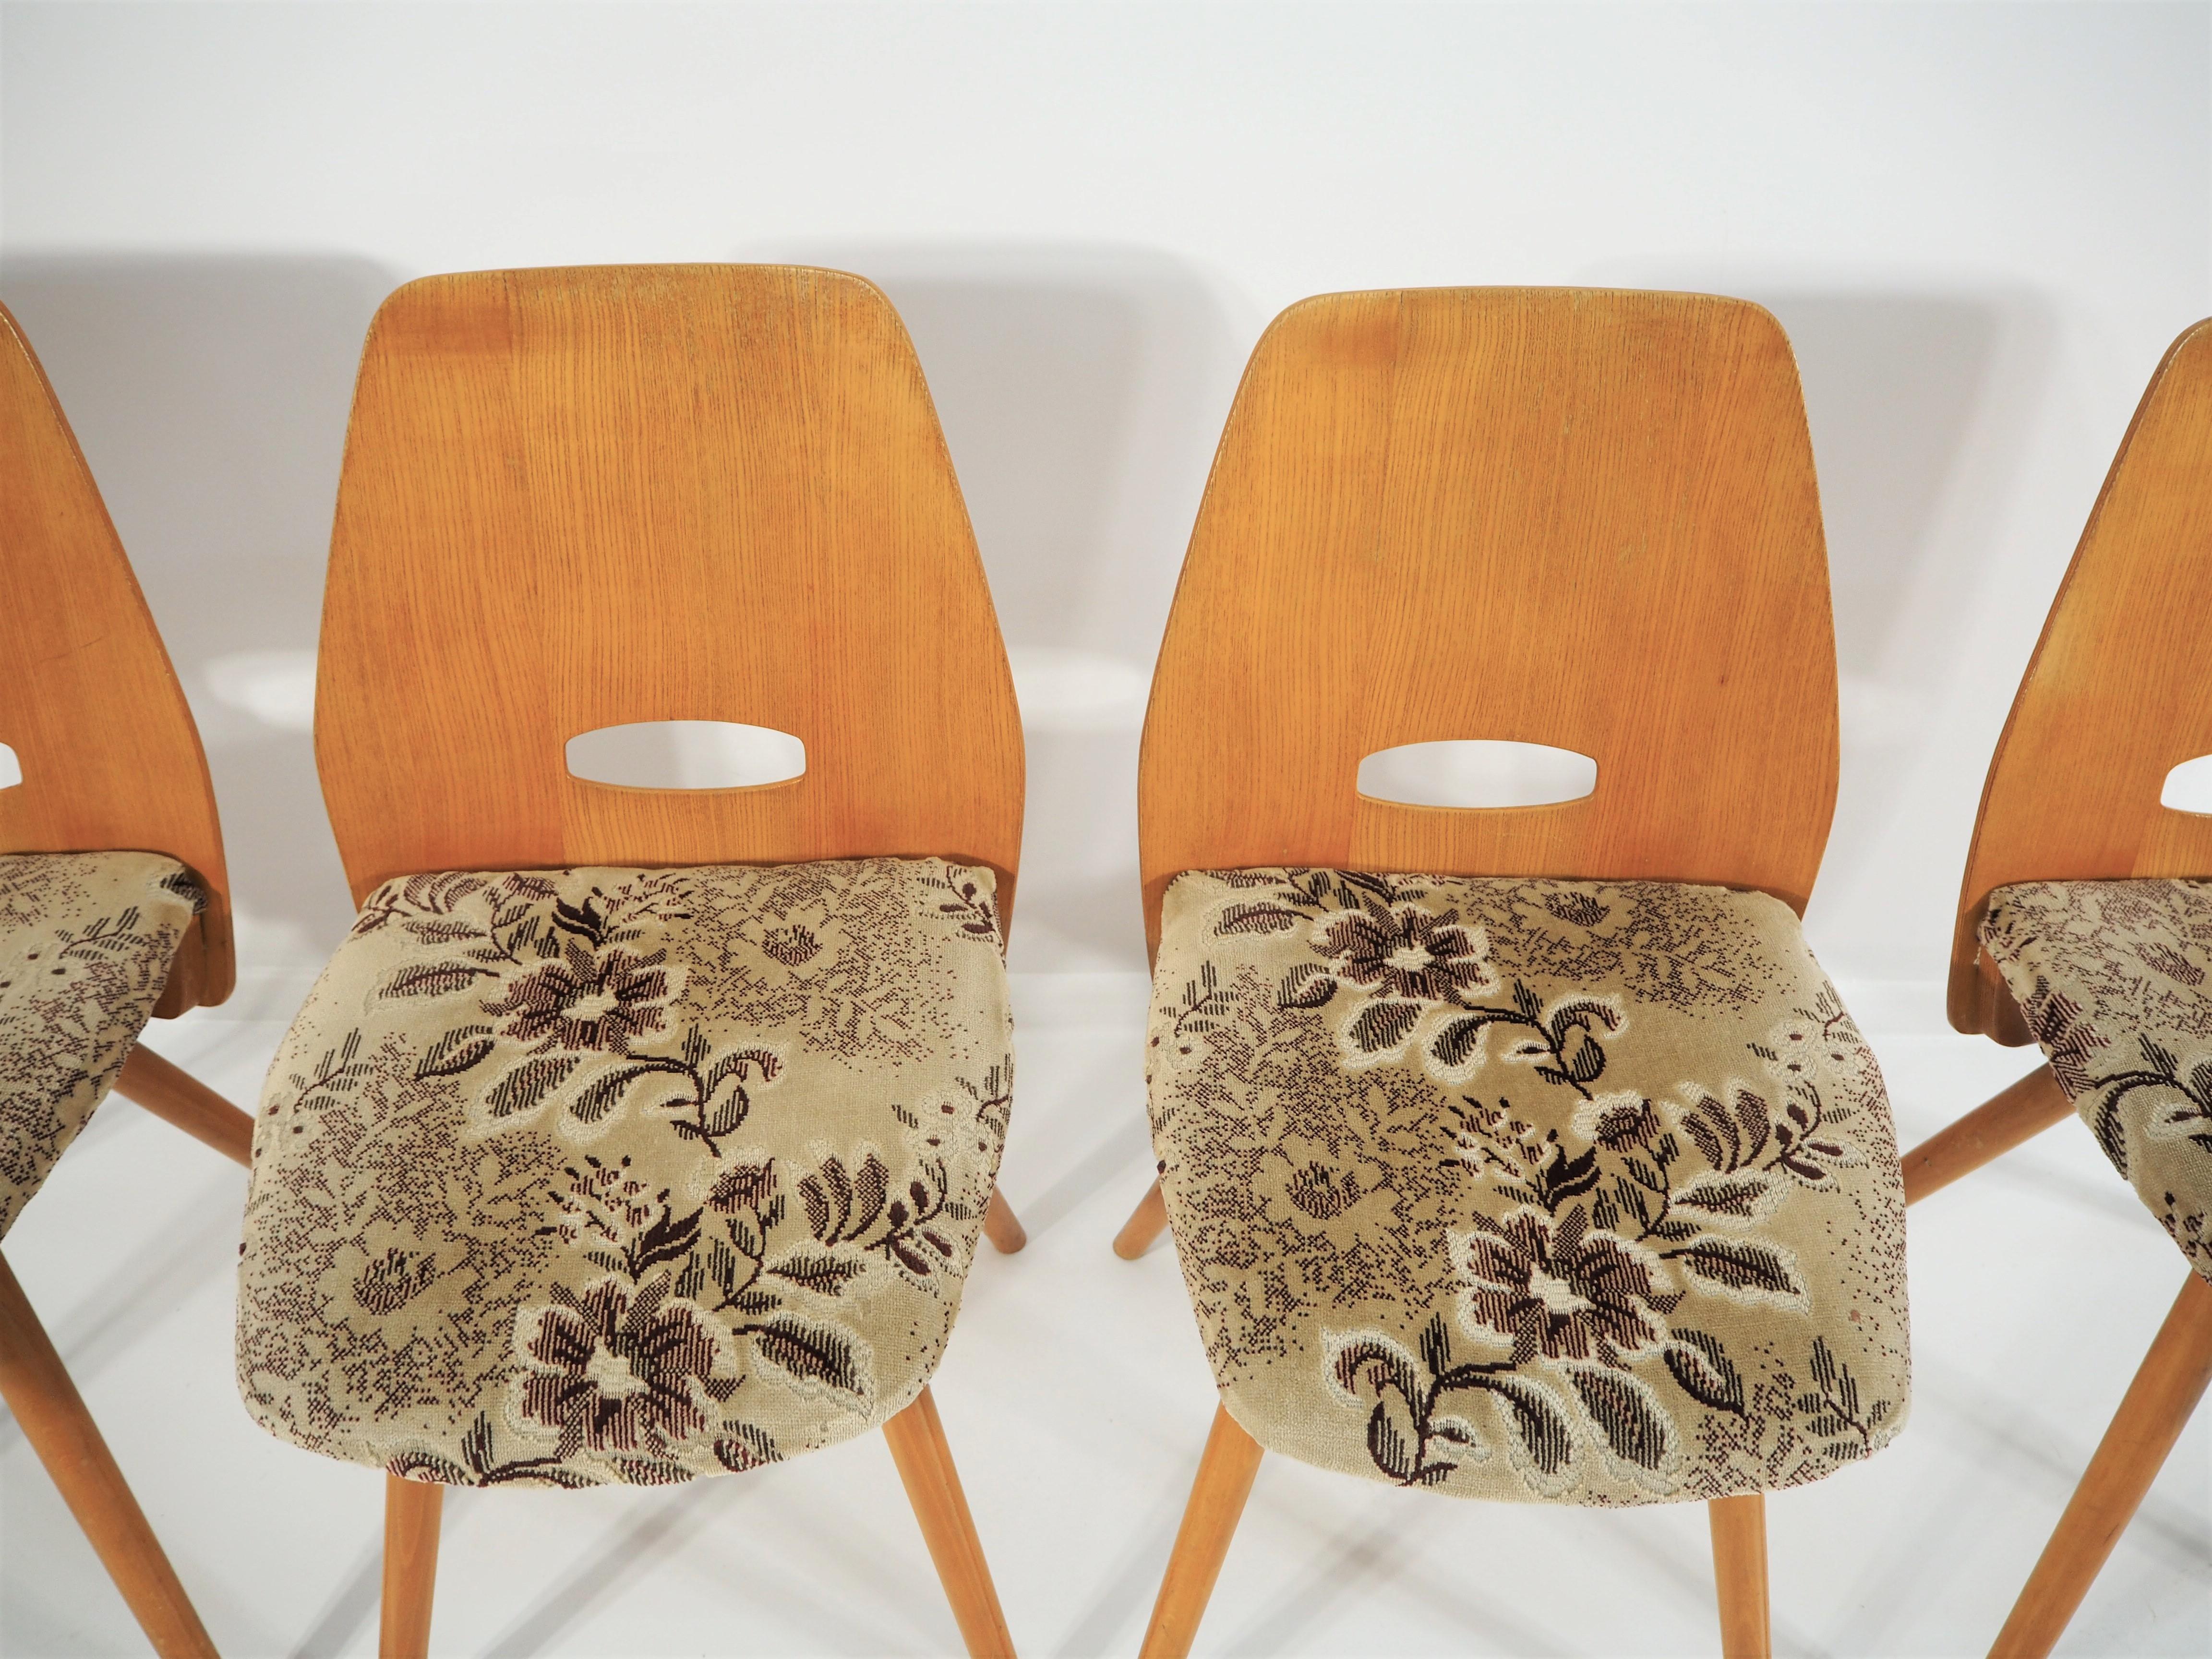 Chairs from Tatra Nábytok, 1960s, Set of 4. Ashwood, original condition with label. Beautiful Minimalist design. Measures: Height 78 cm, width 40 cm, depth 50 cm.